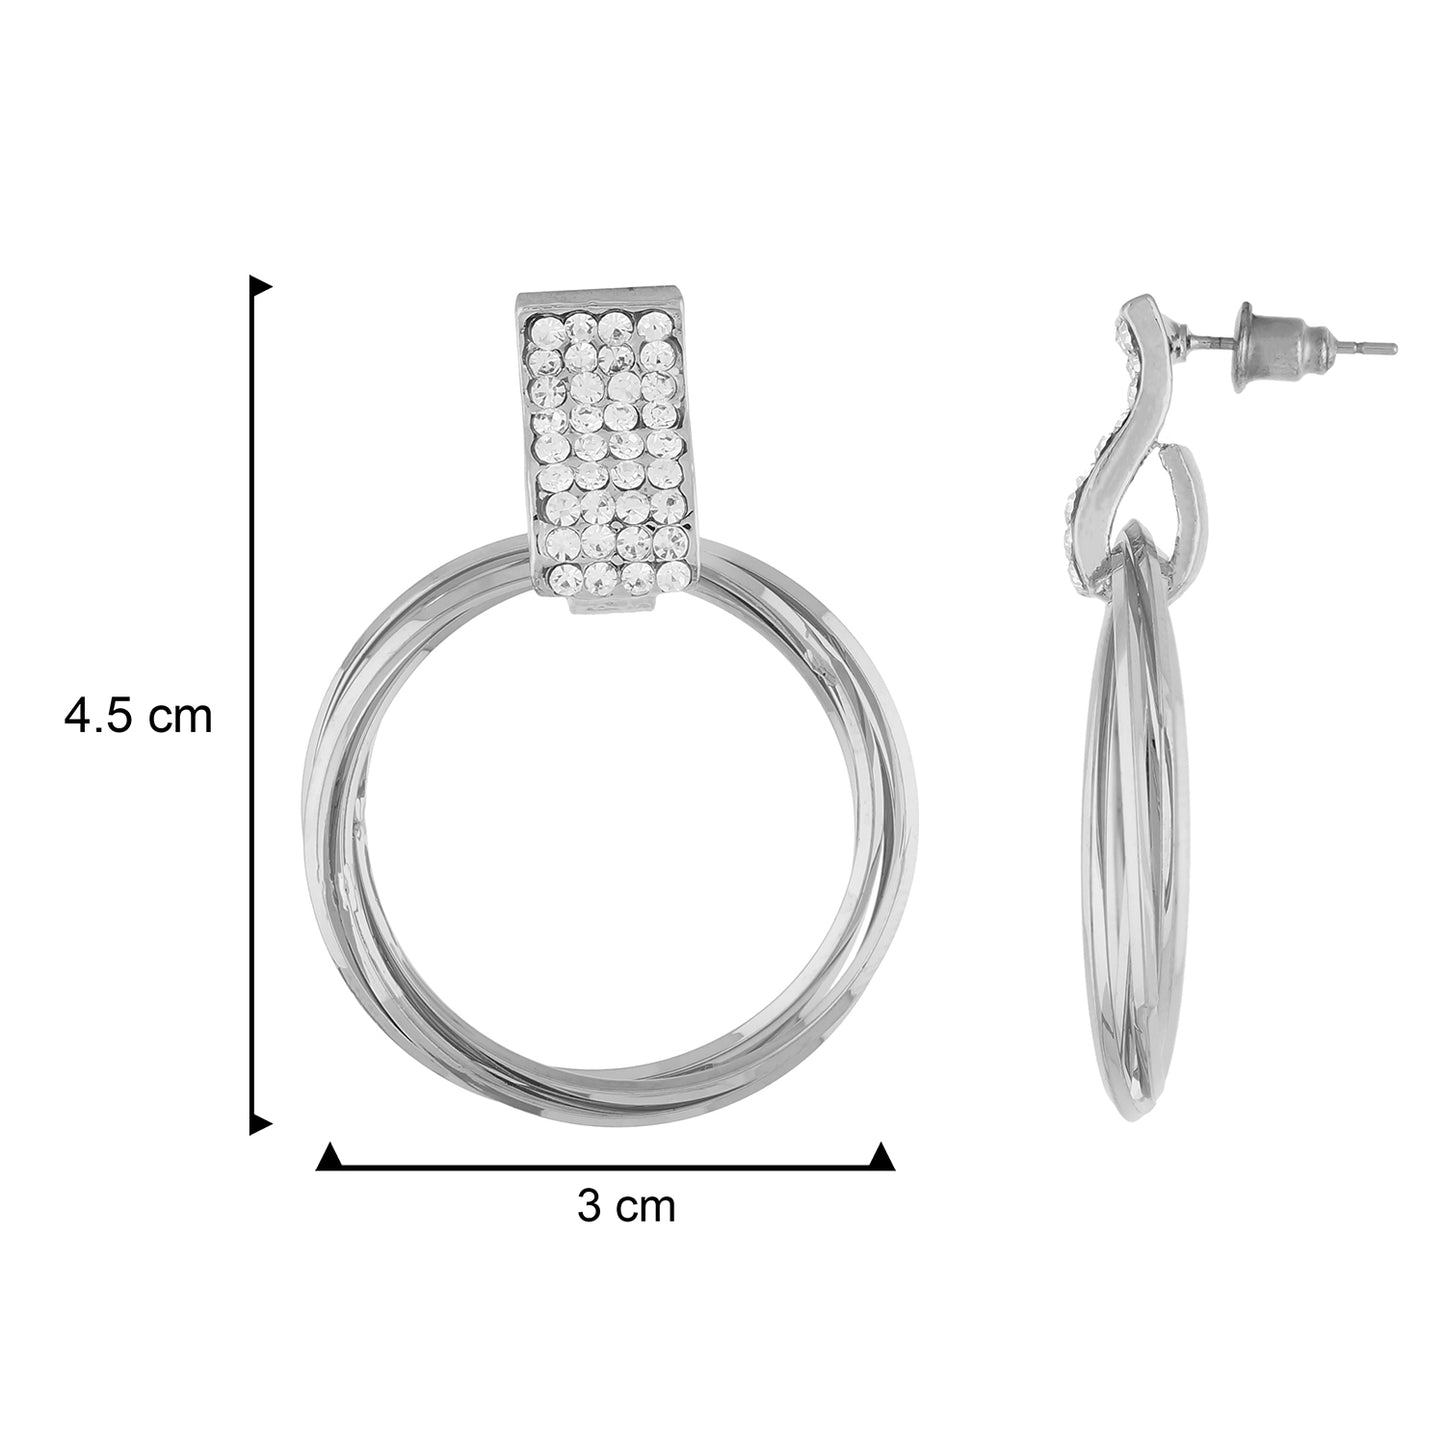 Classy Silver Colour Round Ring Design Earring for Girls and Women